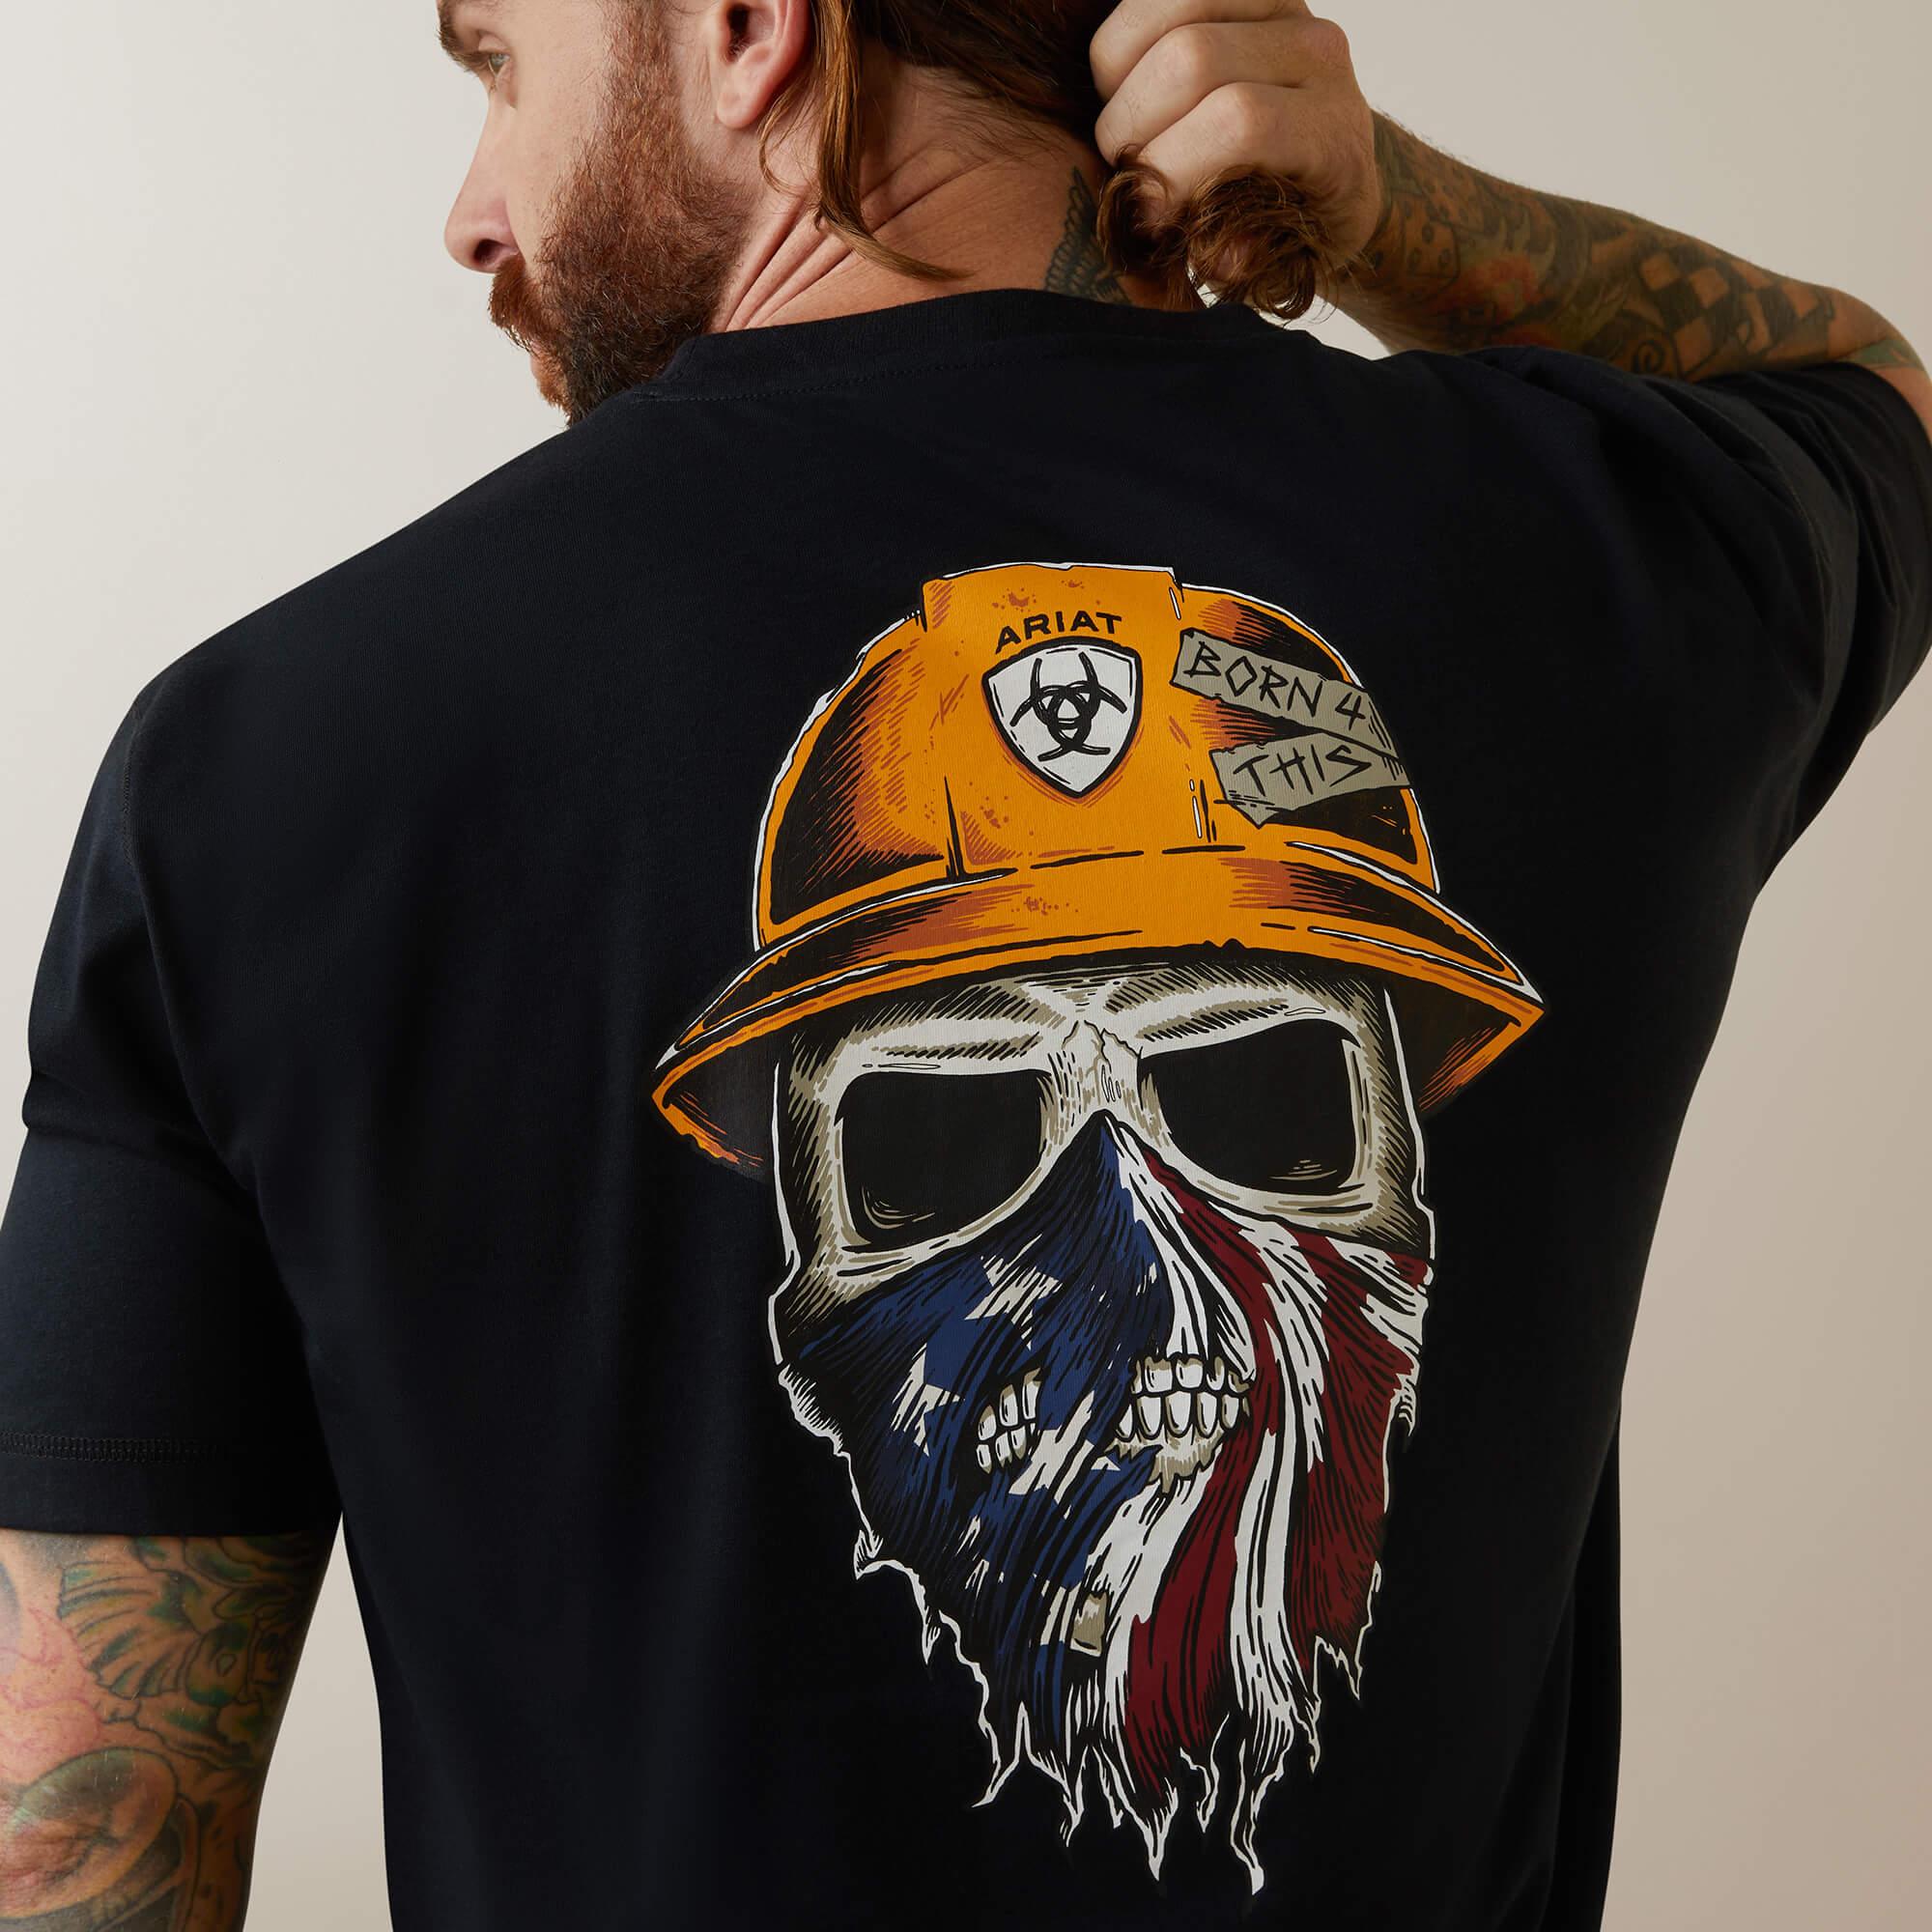 Rebar Workman Born For This T-Shirt - Purpose-Built / Home of the Trades